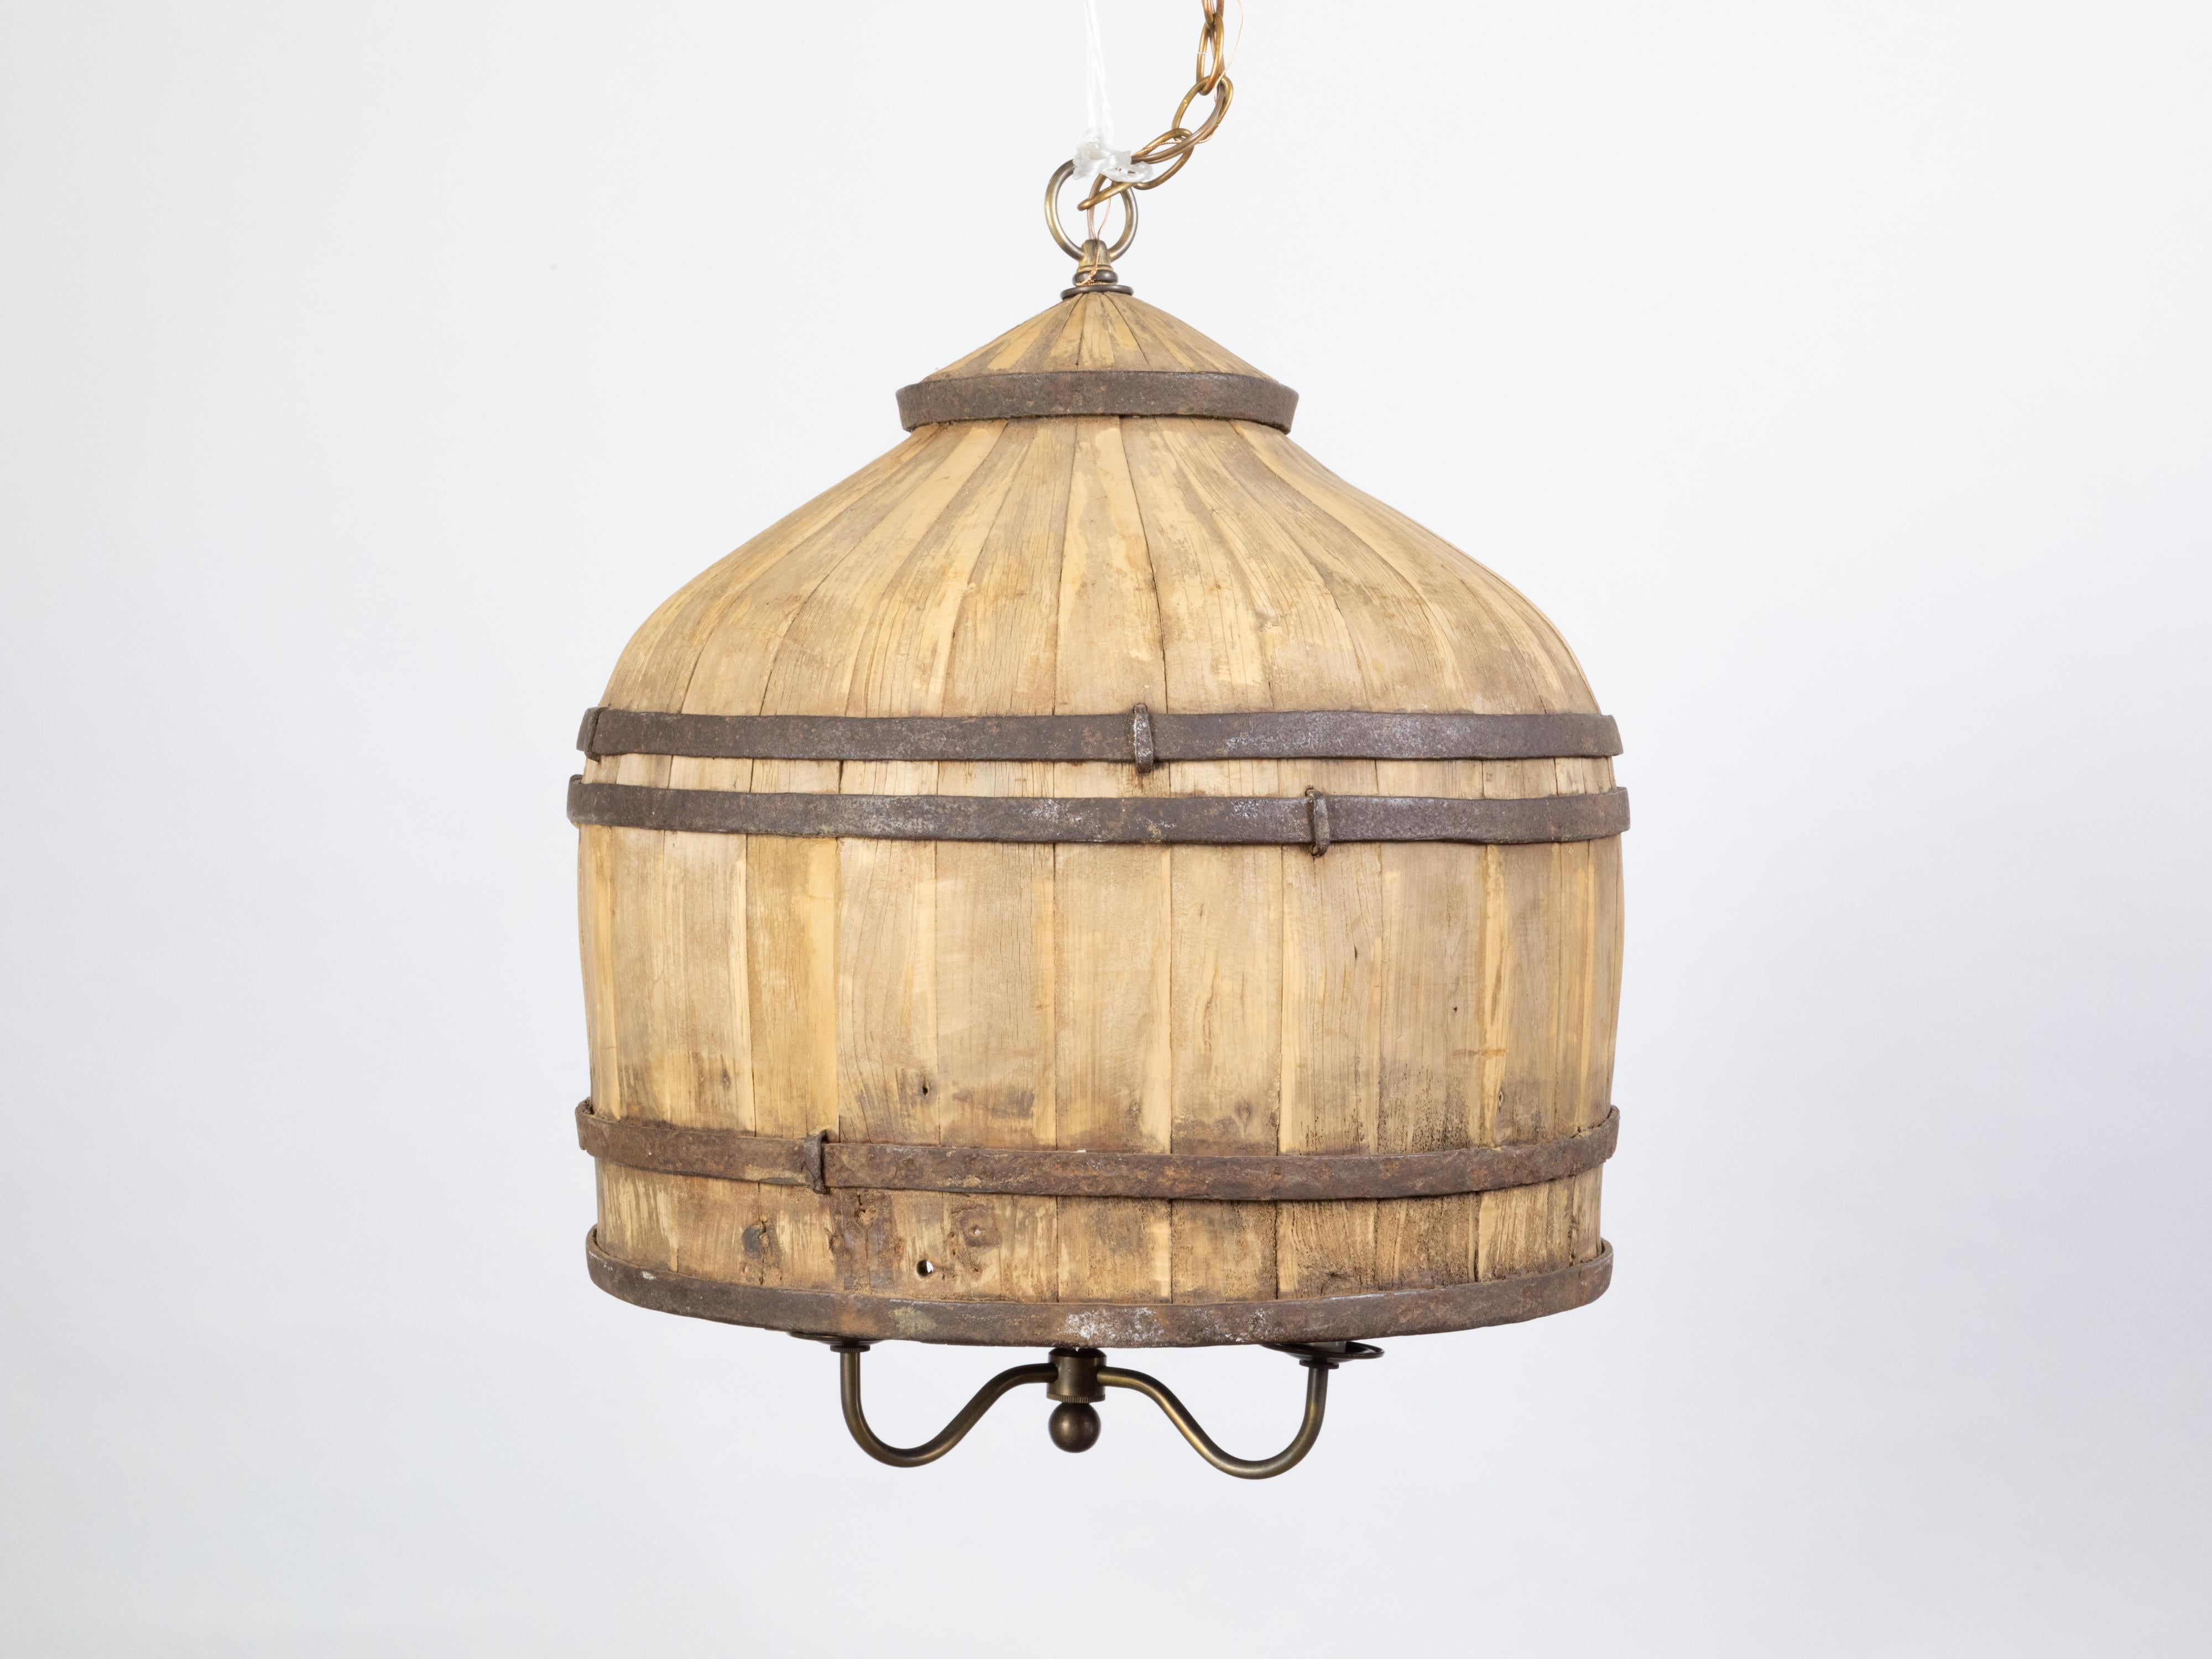 20th Century Rustic English Vintage Wooden Barrel Light Fixture with Three Scrolling Arms For Sale